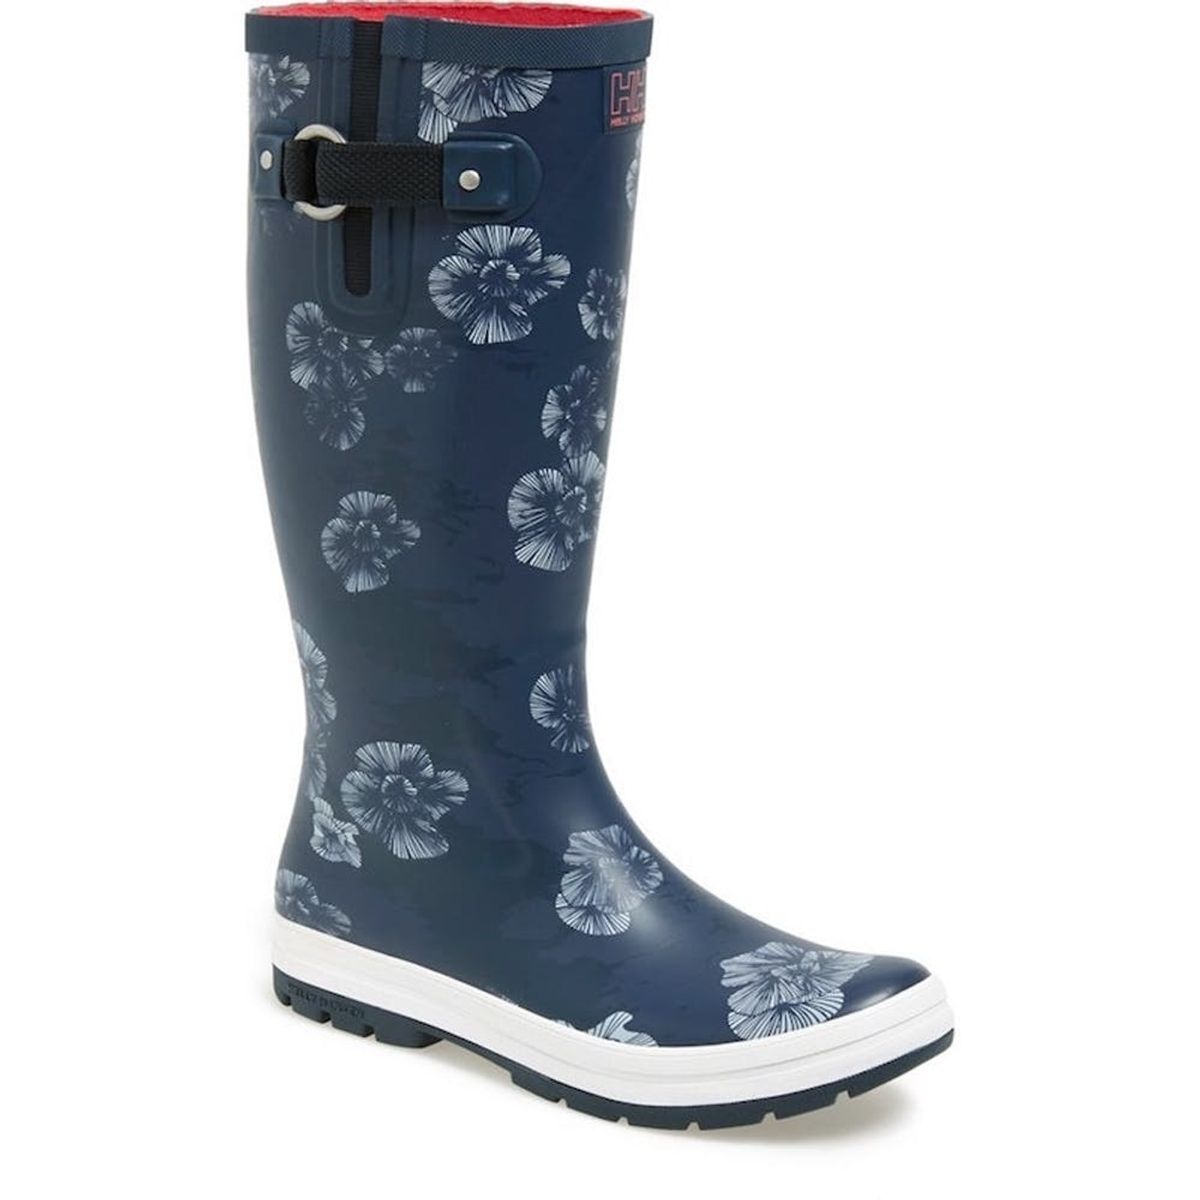 9 Rain Boots to Get You Through Fall That Aren’t Hunters